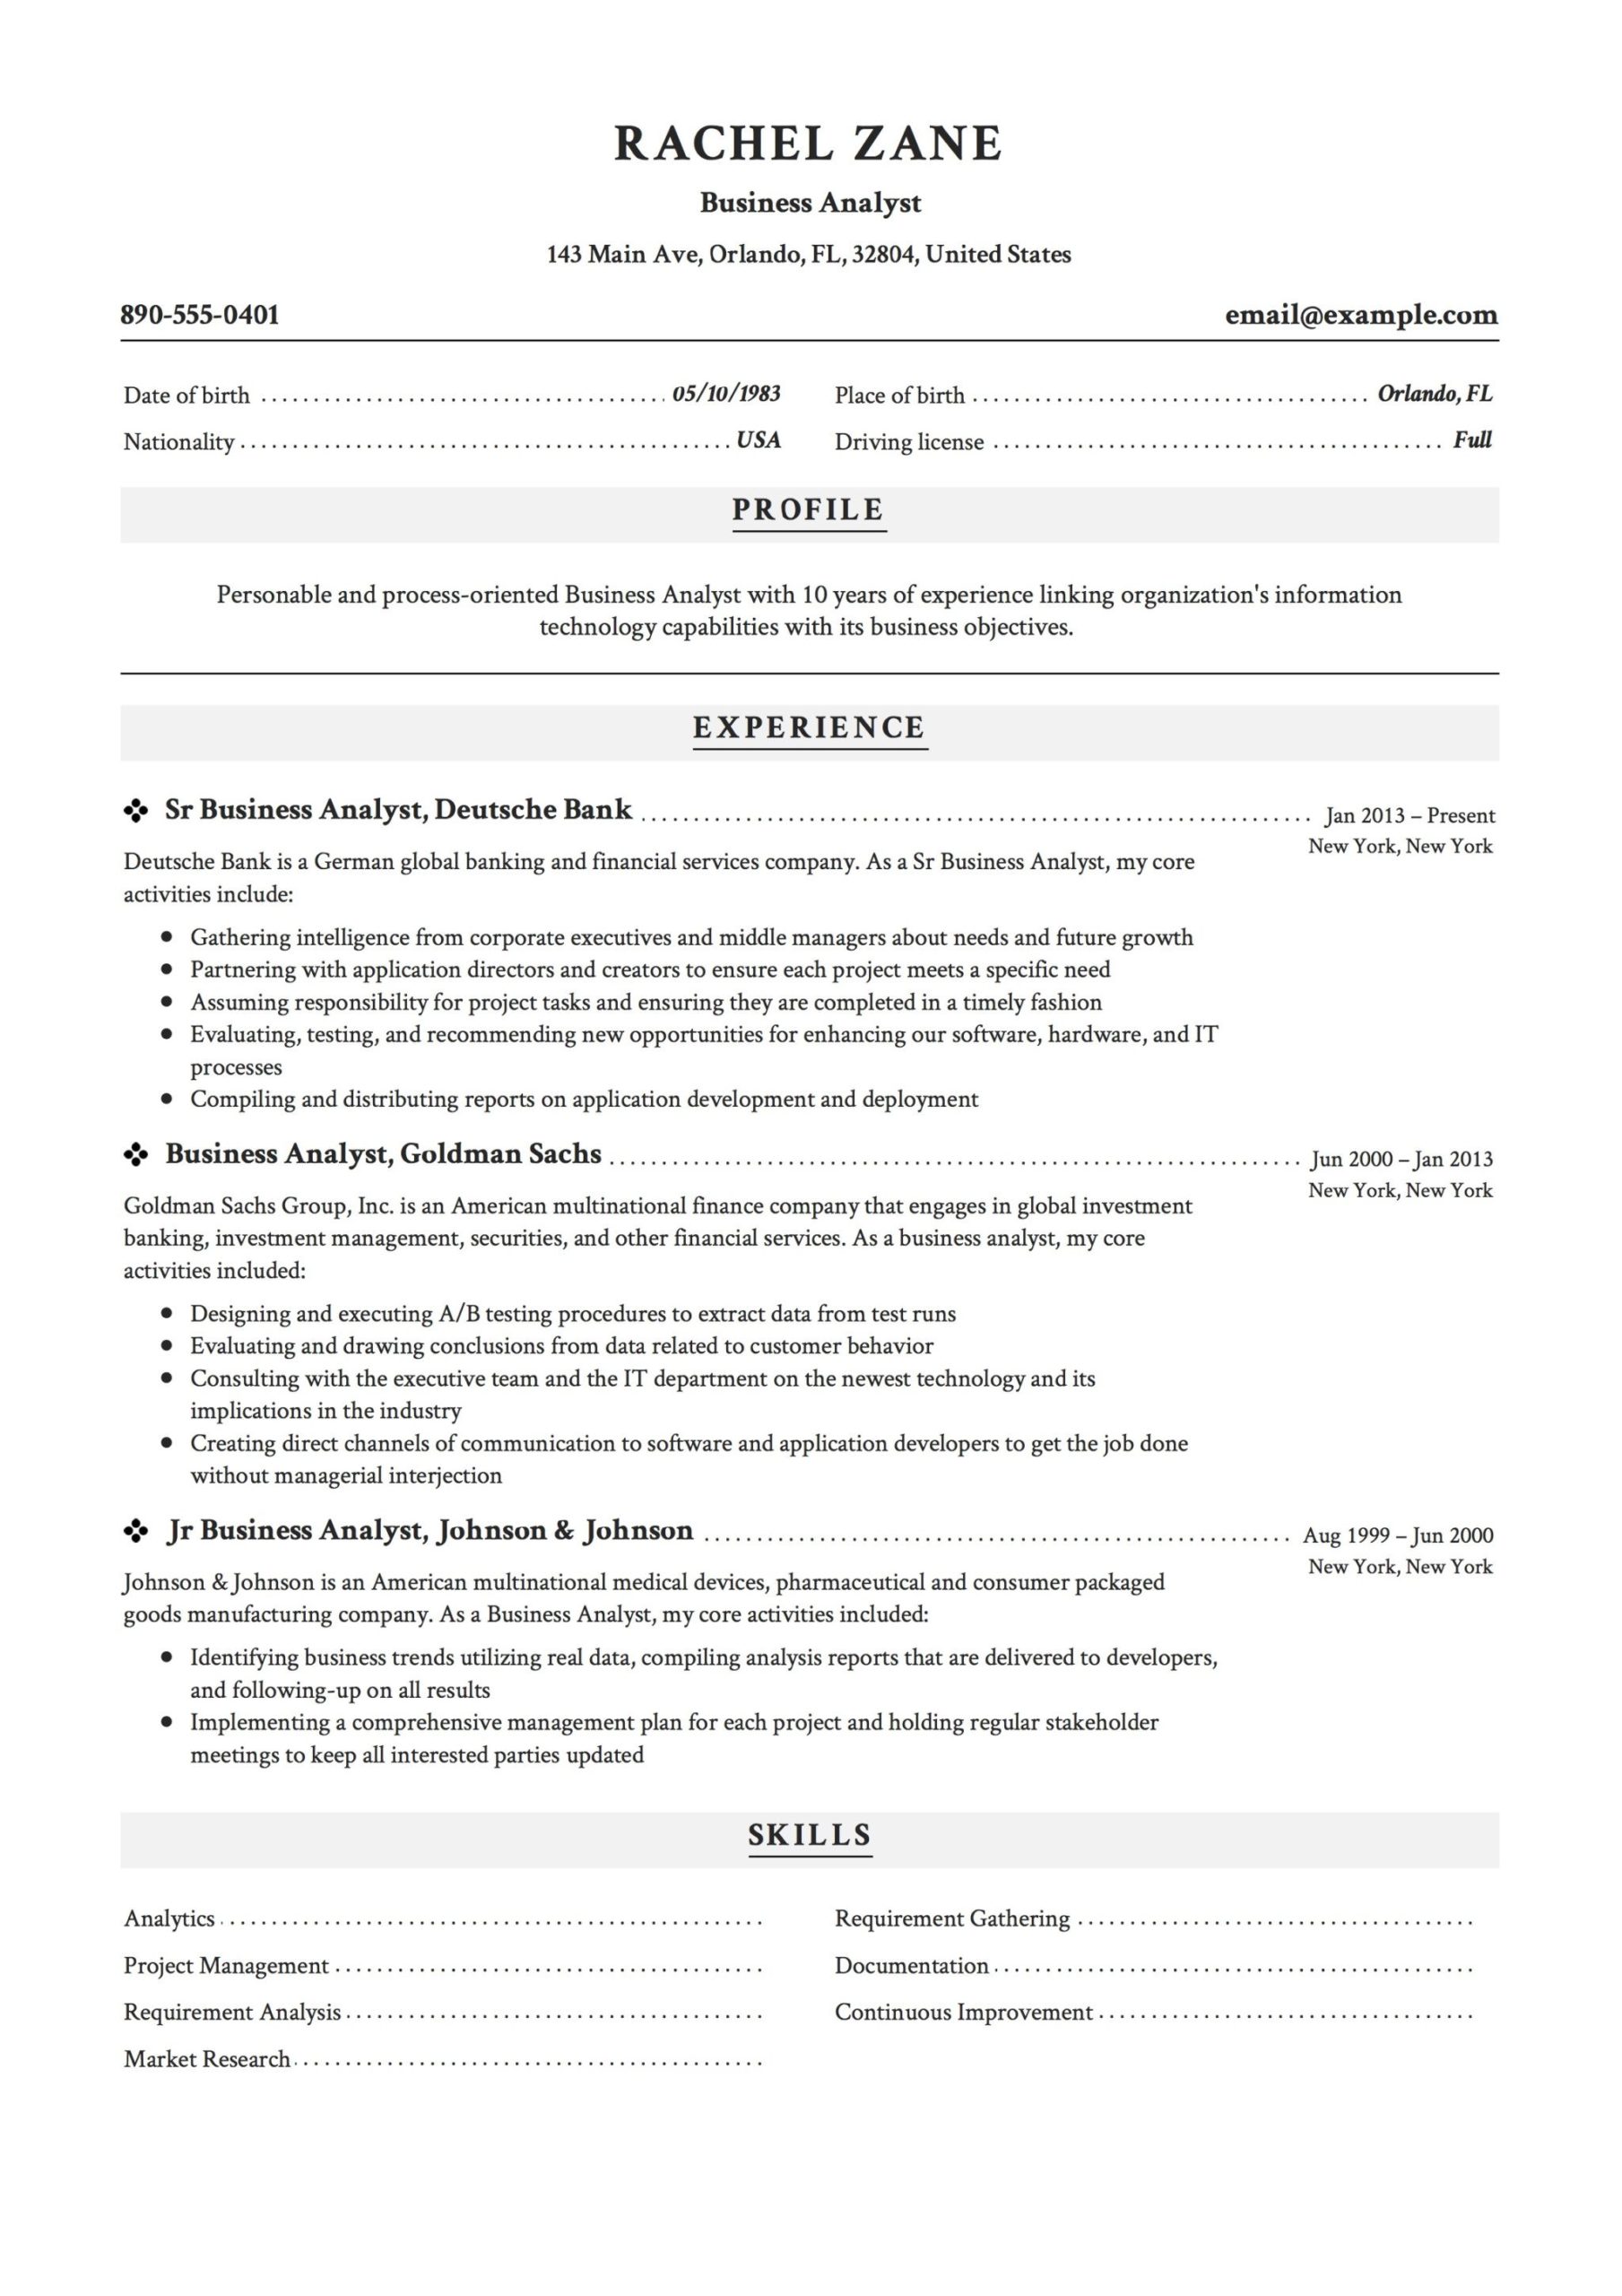 Sample Resume for Banking Business Analyst Business Analyst Resume Examples & Writing Guide 2022